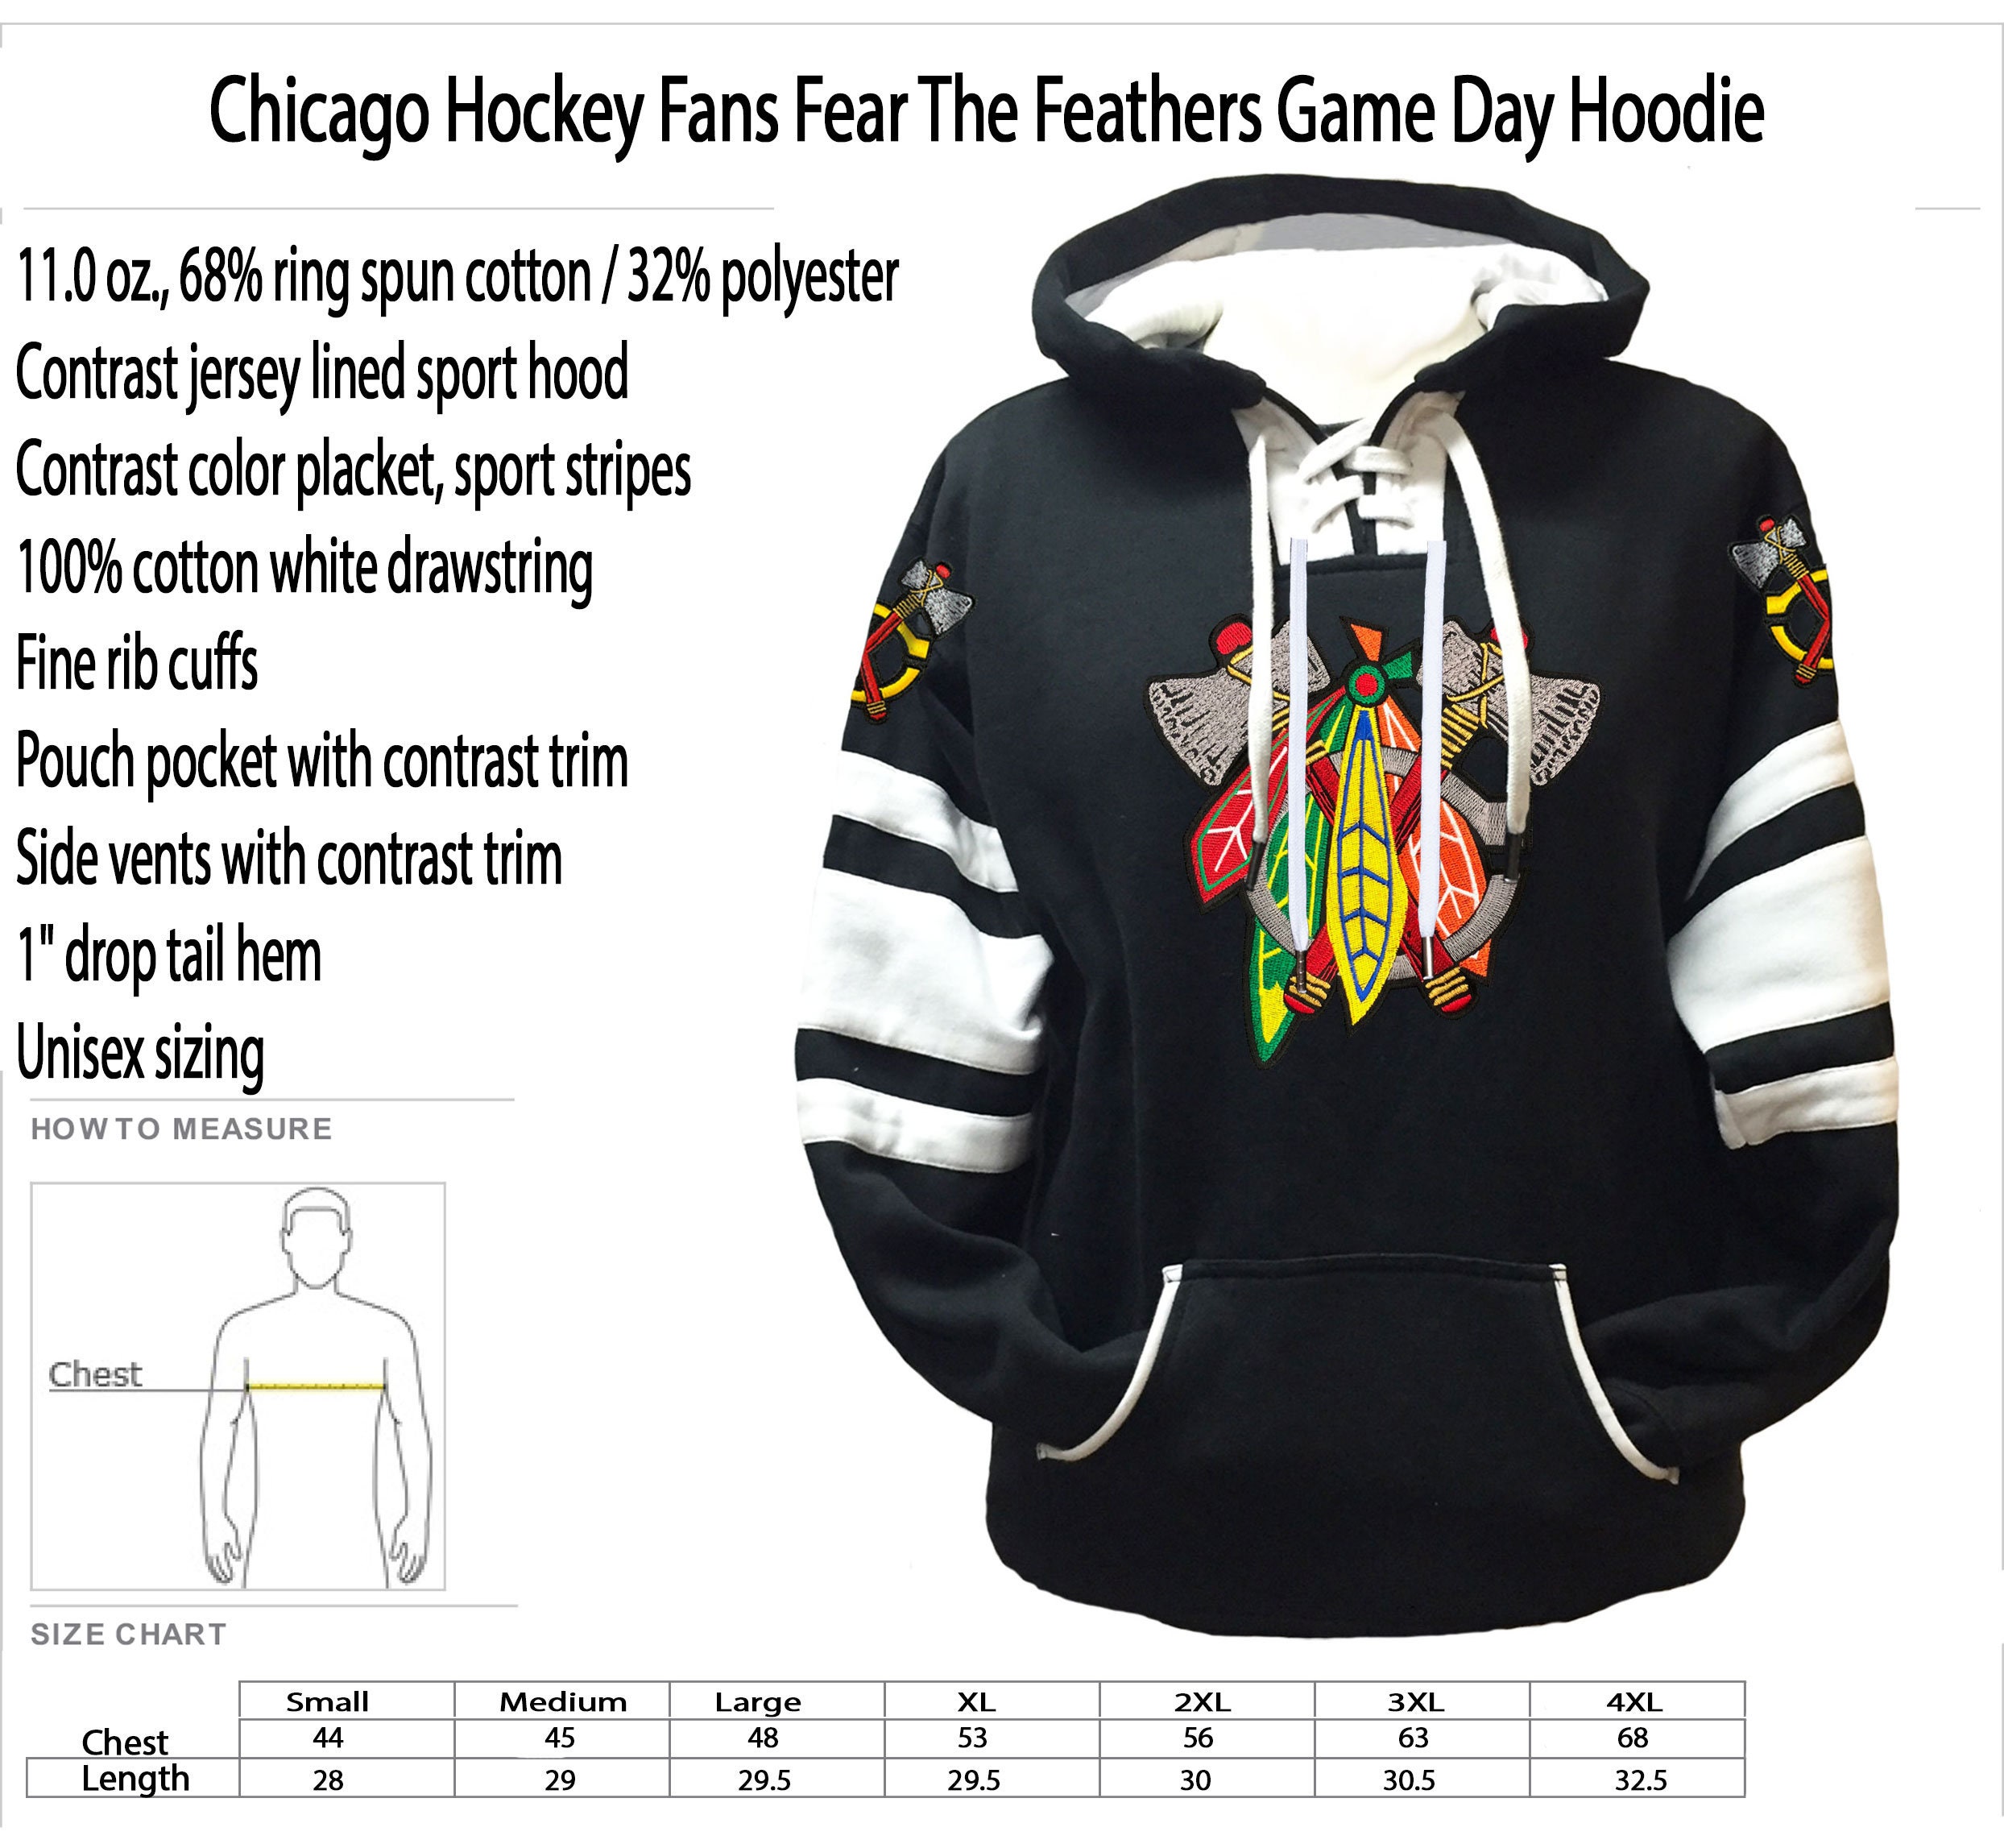  Fear The Feathers Game Day Blackhawk Hockey Hoodie Black Red  (Large) : Handmade Products